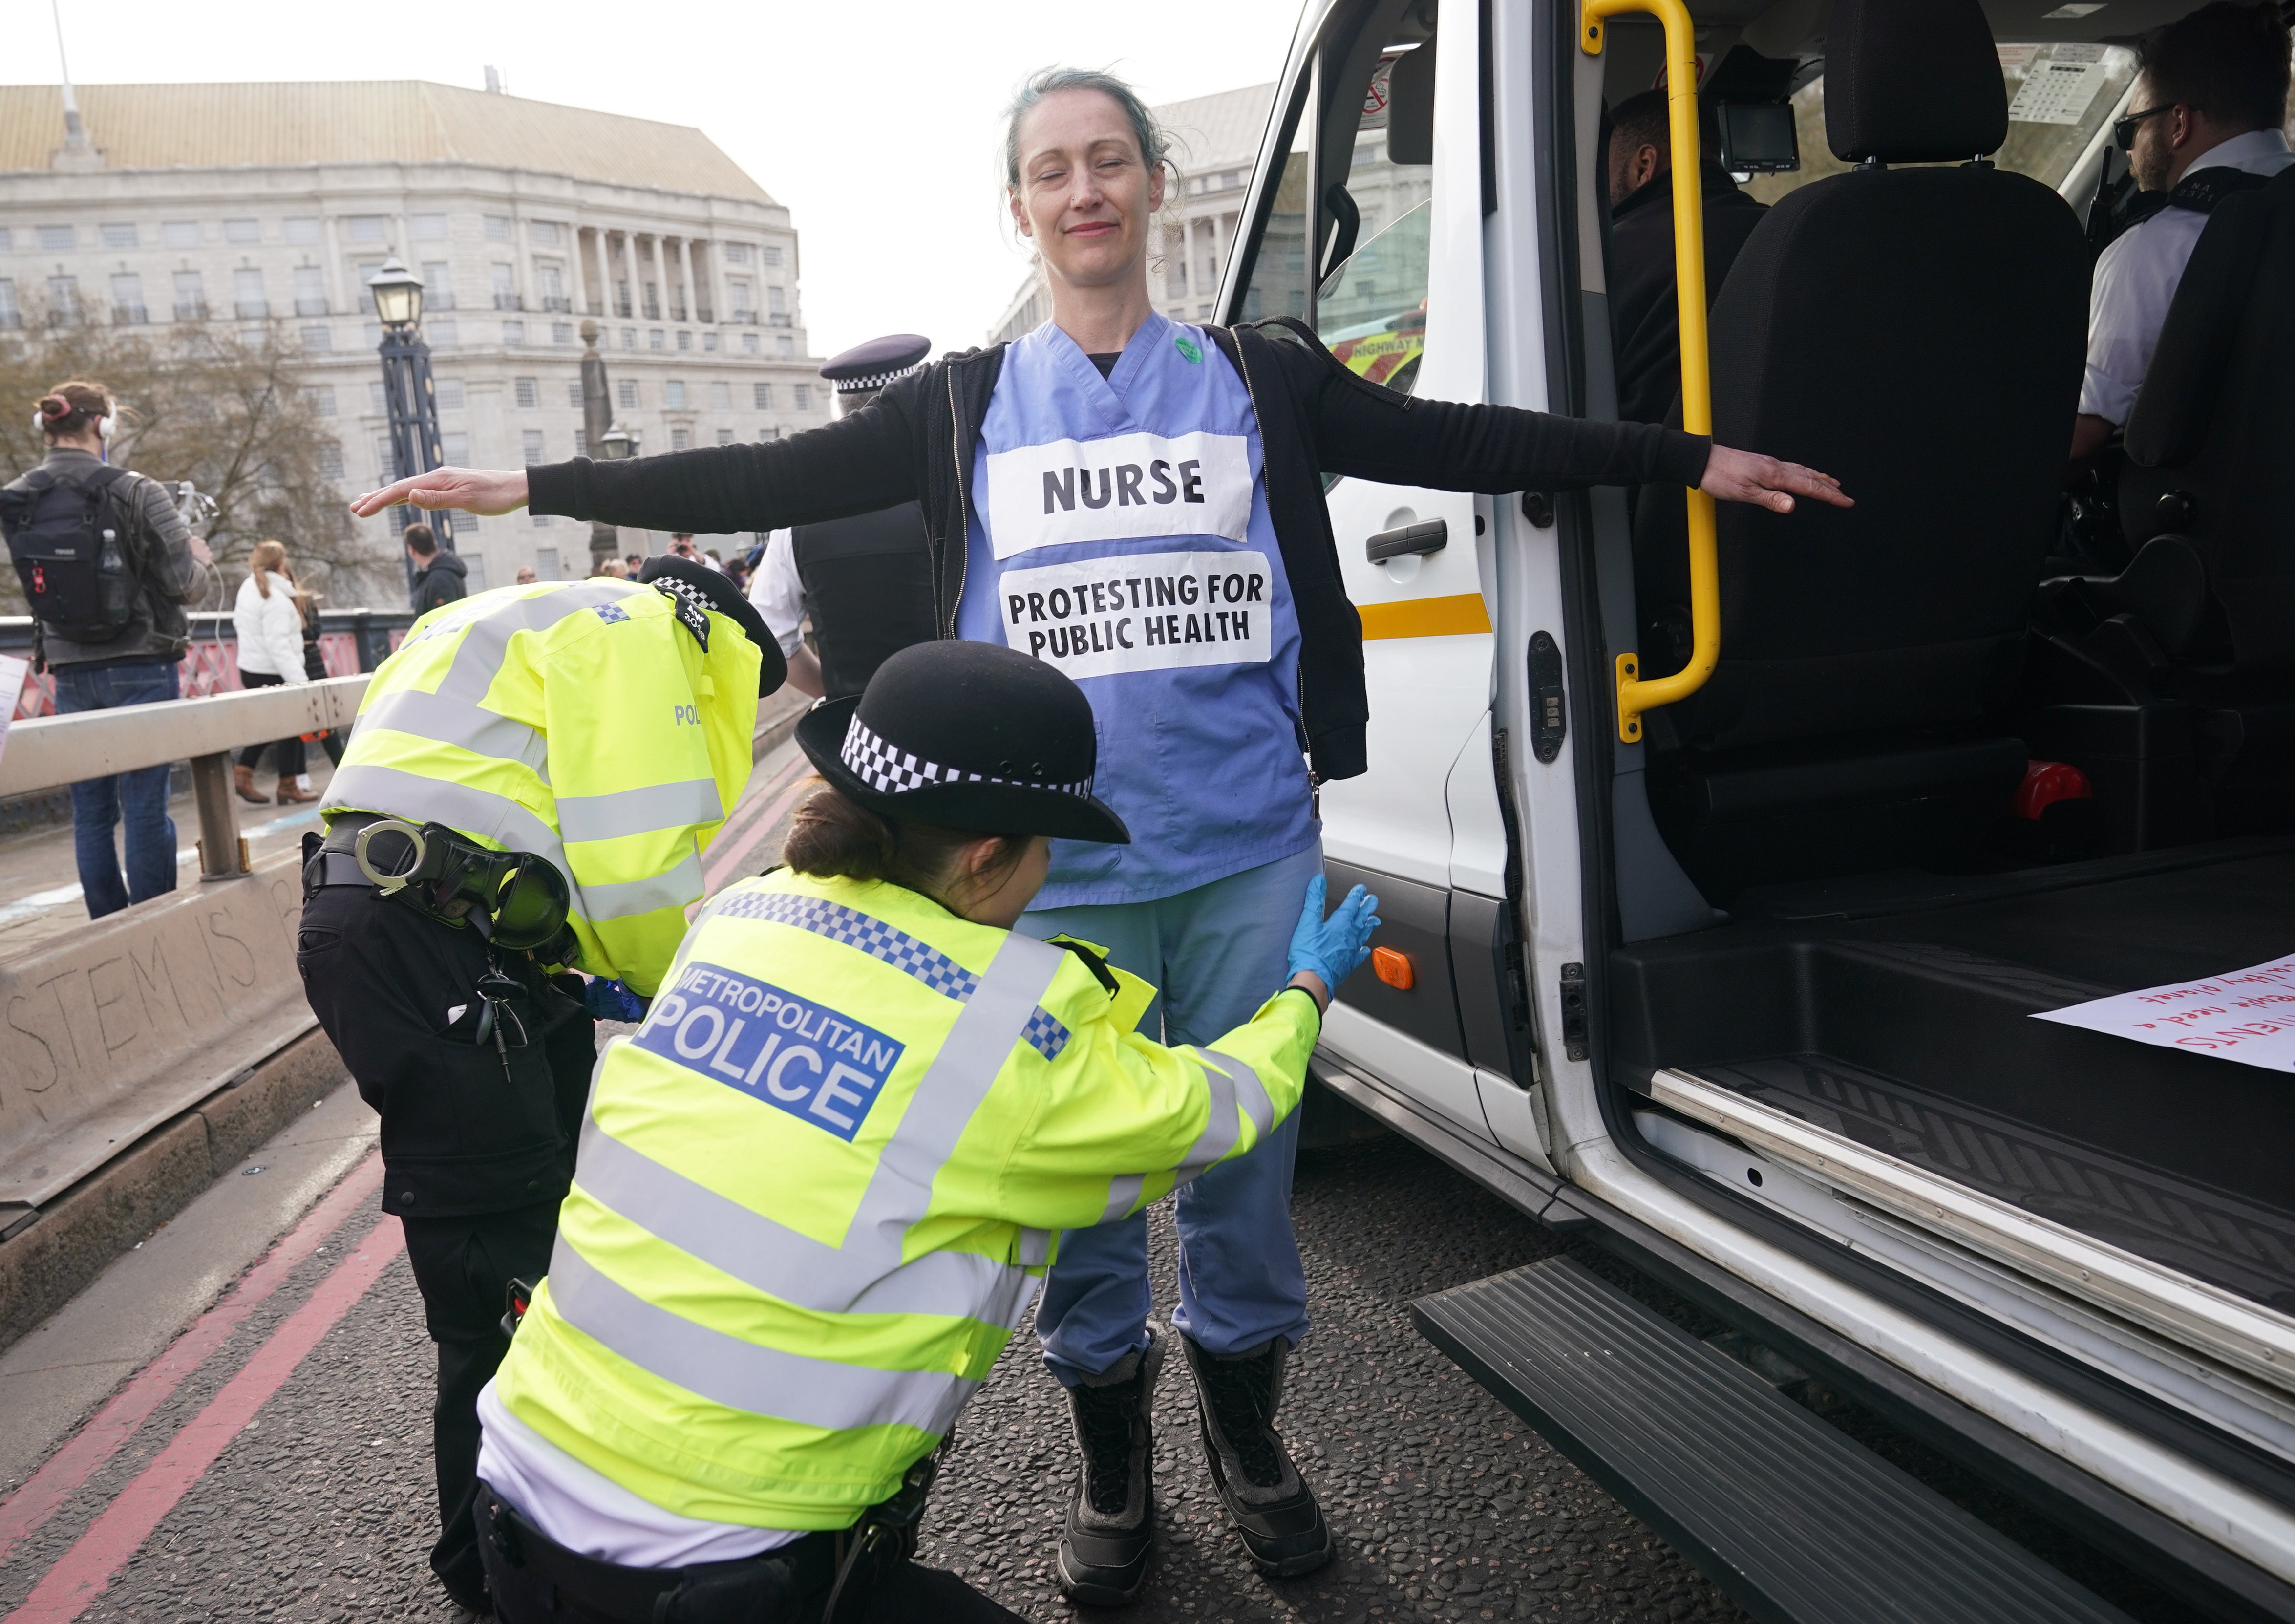 A protestor in nurse’s scrubs is searched by police on Lambeth Bridge (Yui Mok/PA)